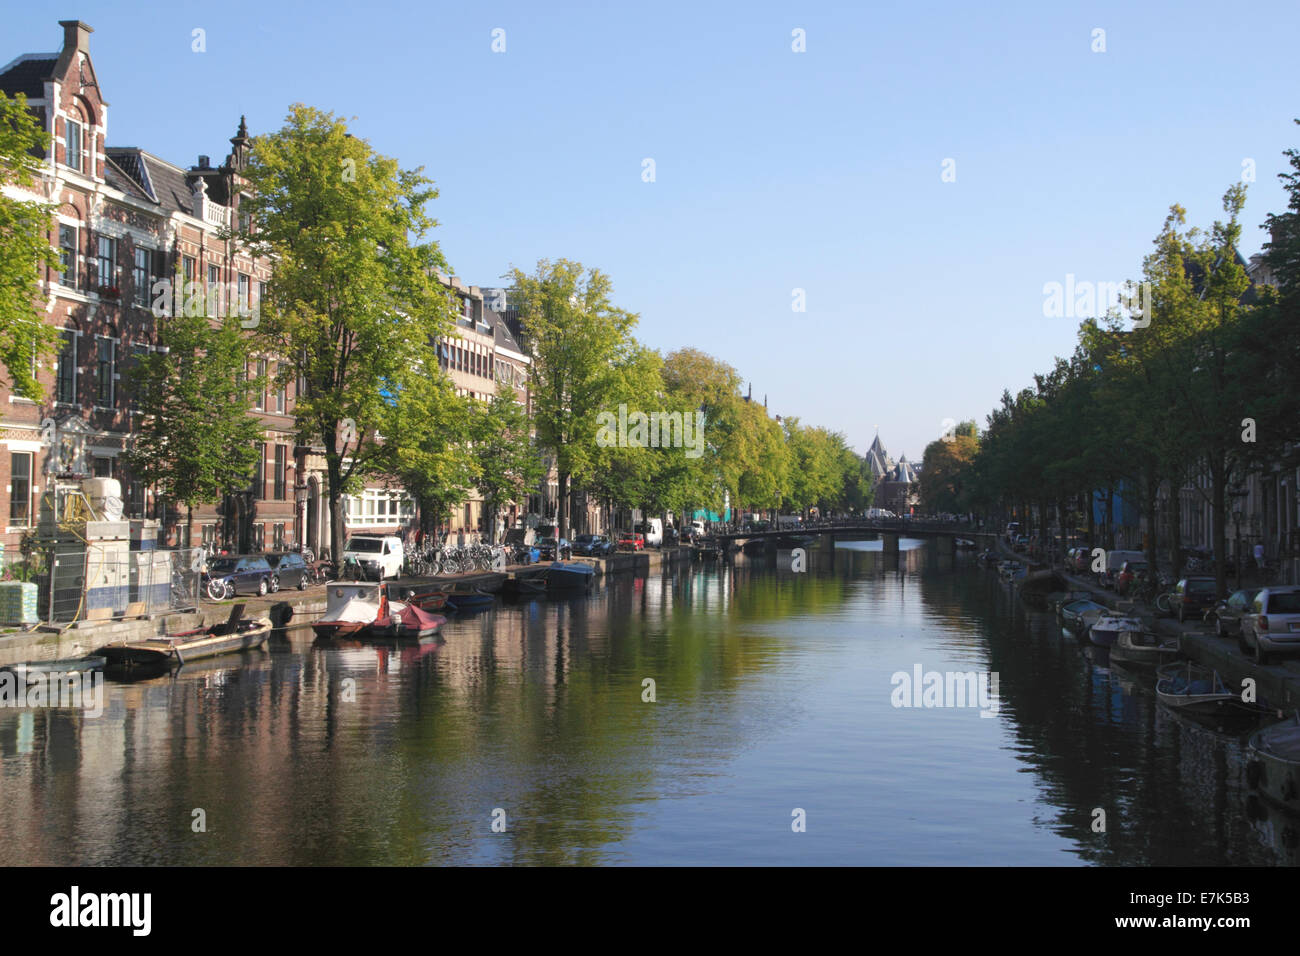 Oudezijds Voorburgwal Canal Amsterdam Holland Stock Photo